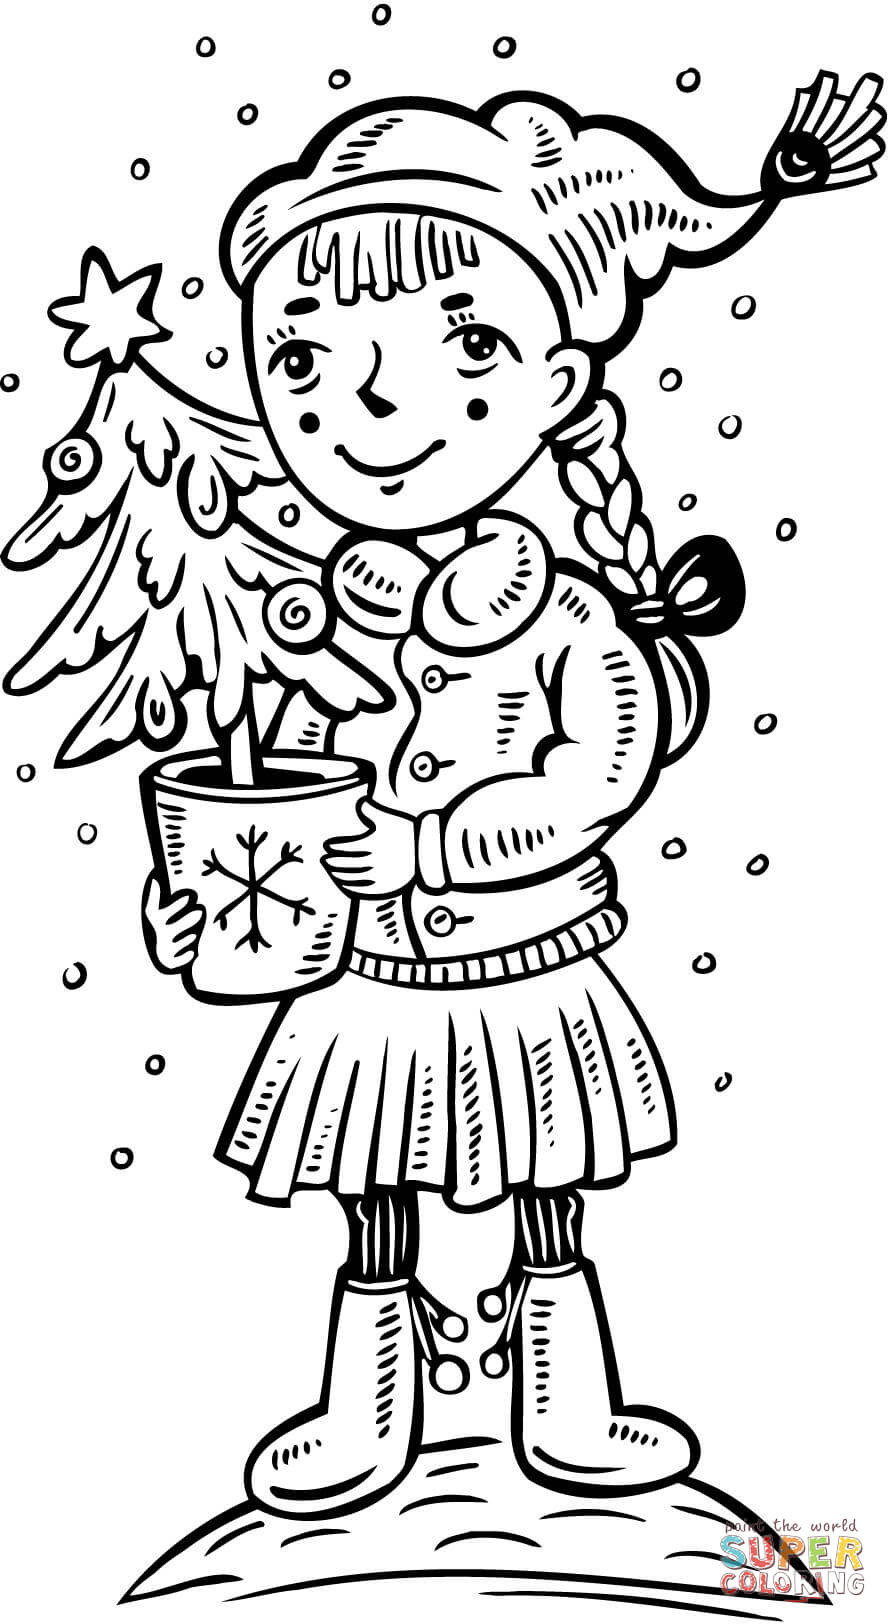 Girls Christmas Coloring Pages
 A Girl with a Christmas Tree coloring page